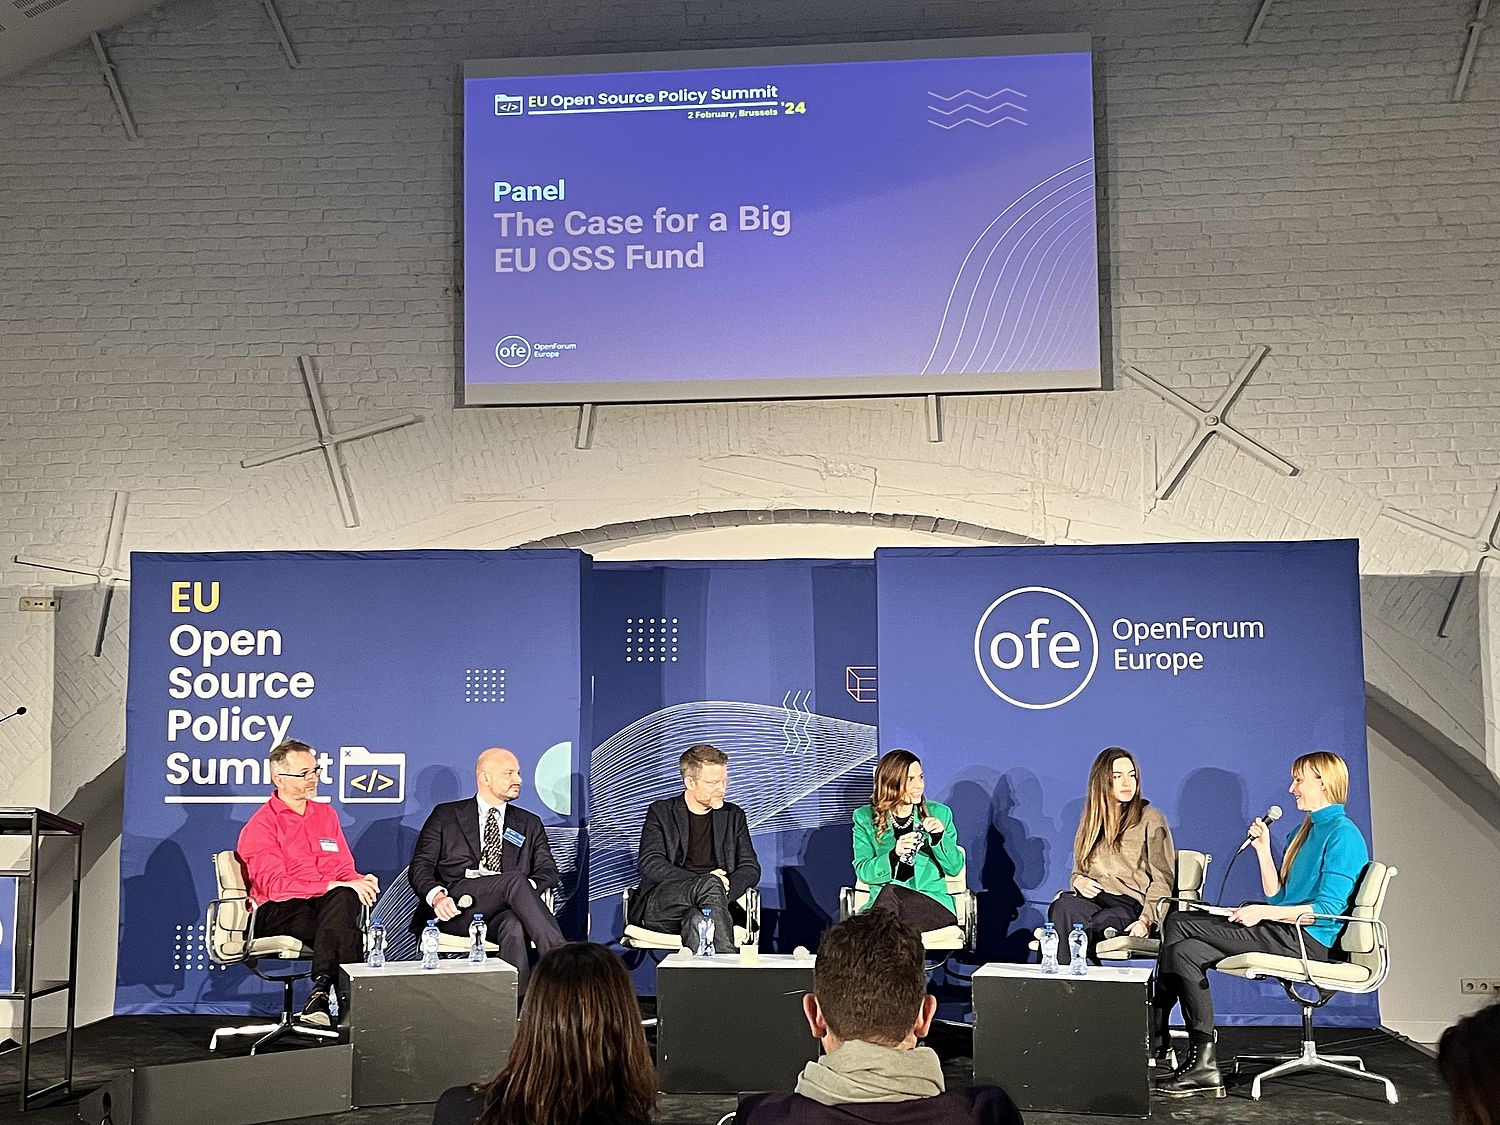 Podium discussion with six participants, under a projection screen with the podium title: The Case for a Big EU OSS Fund